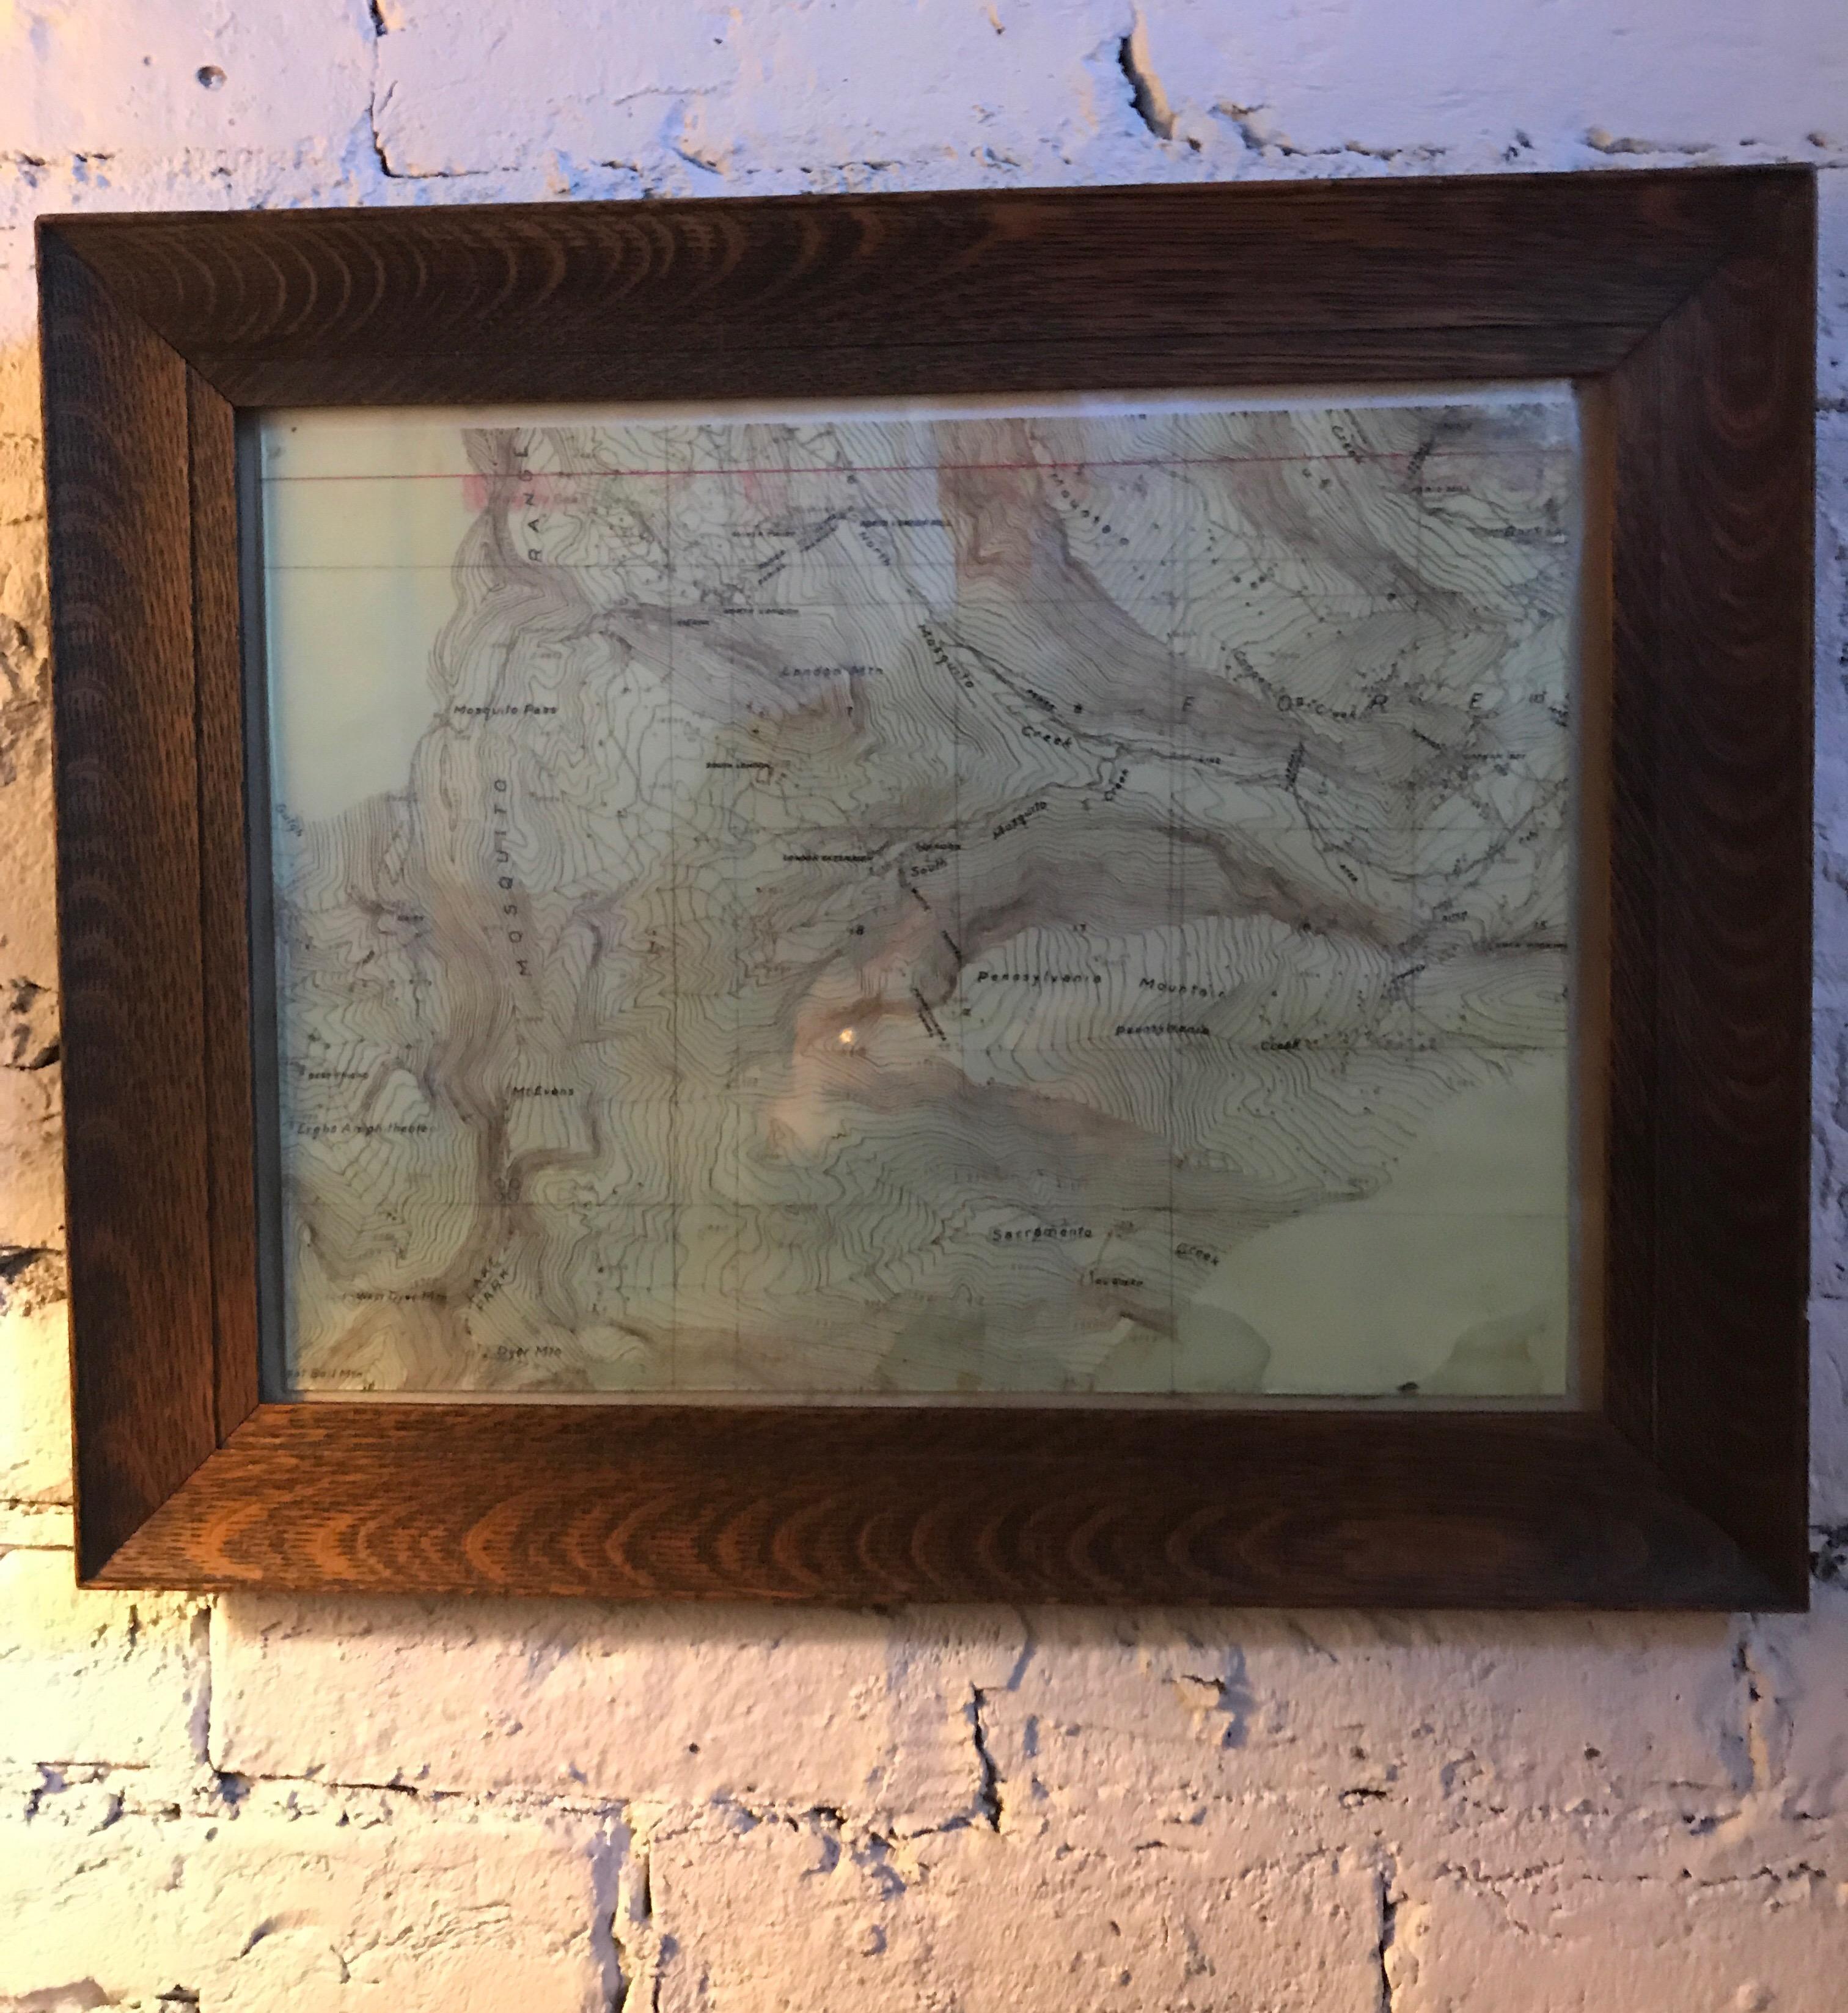 American Topographical Map of the Pennsylvania Mountains in a Quarter Sawn Oak Frame For Sale